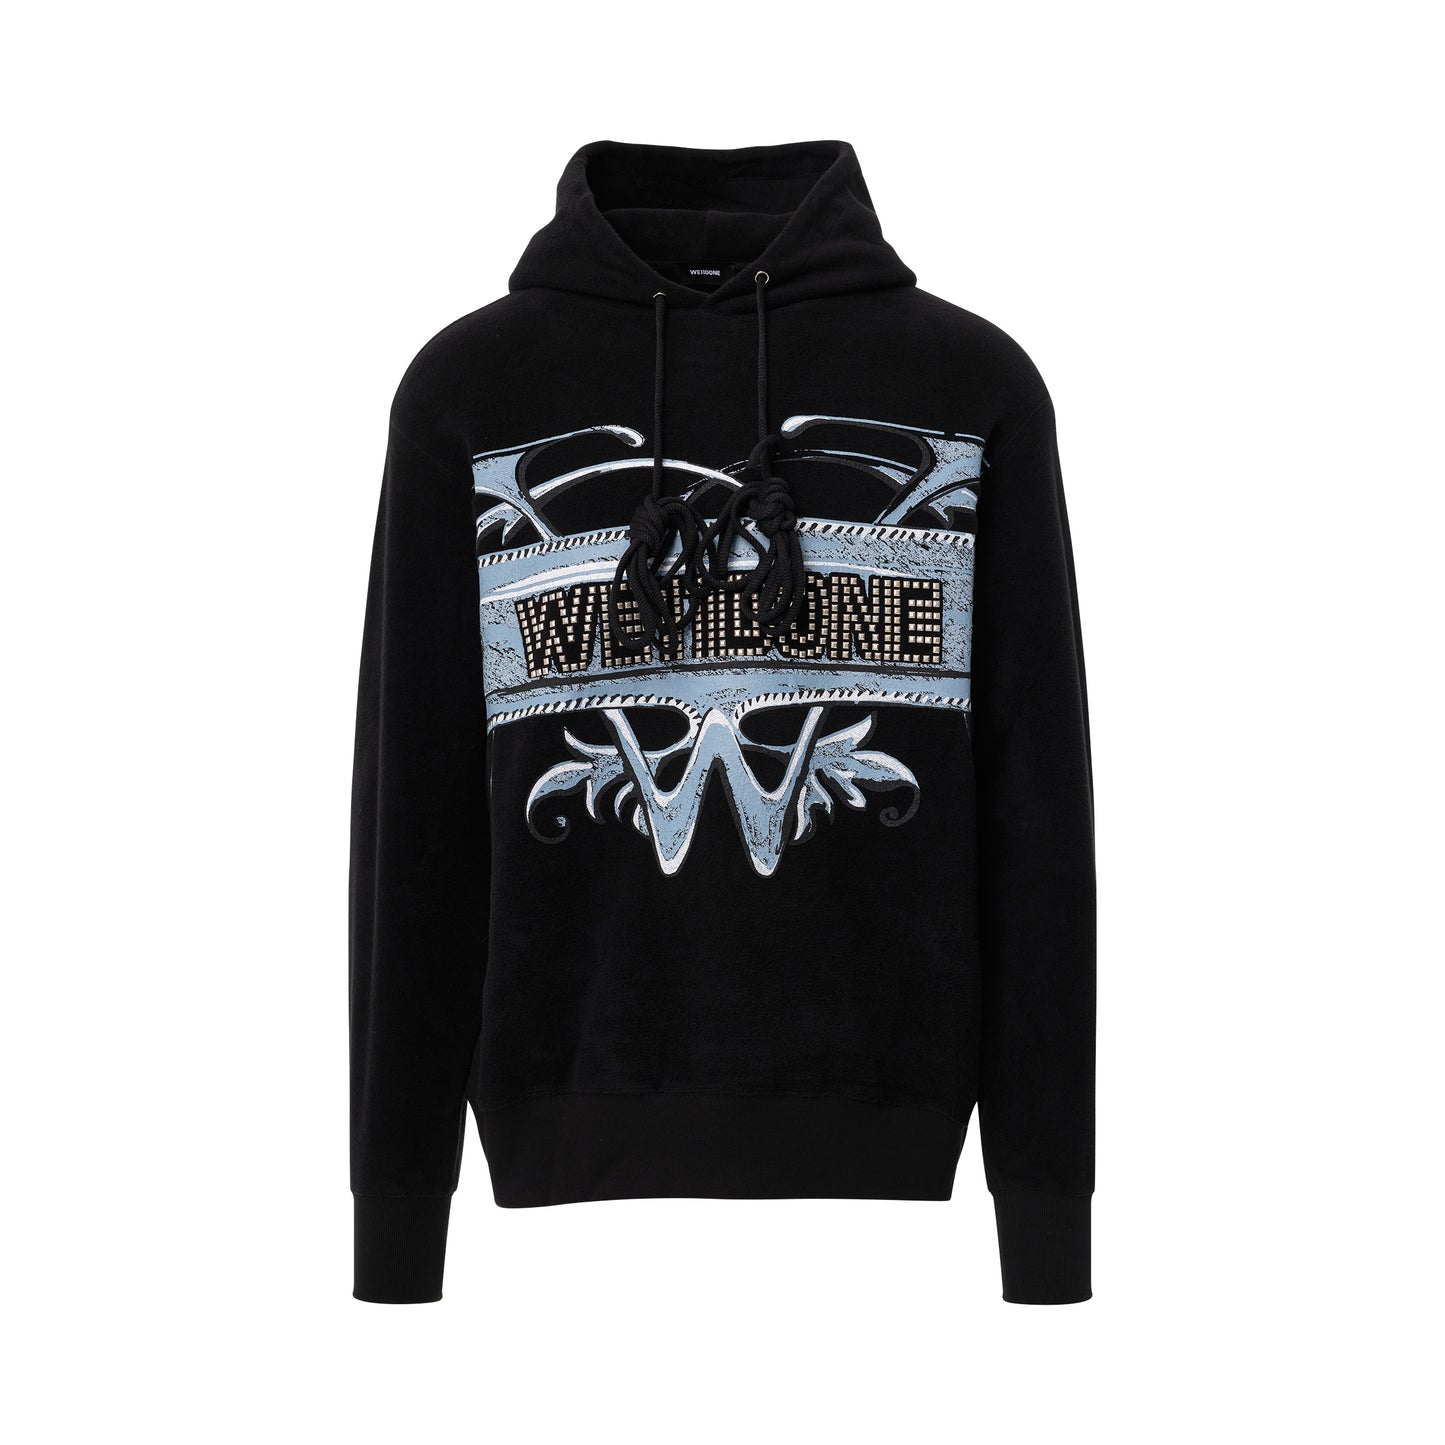 W Graphic Logo Hoodie in Black